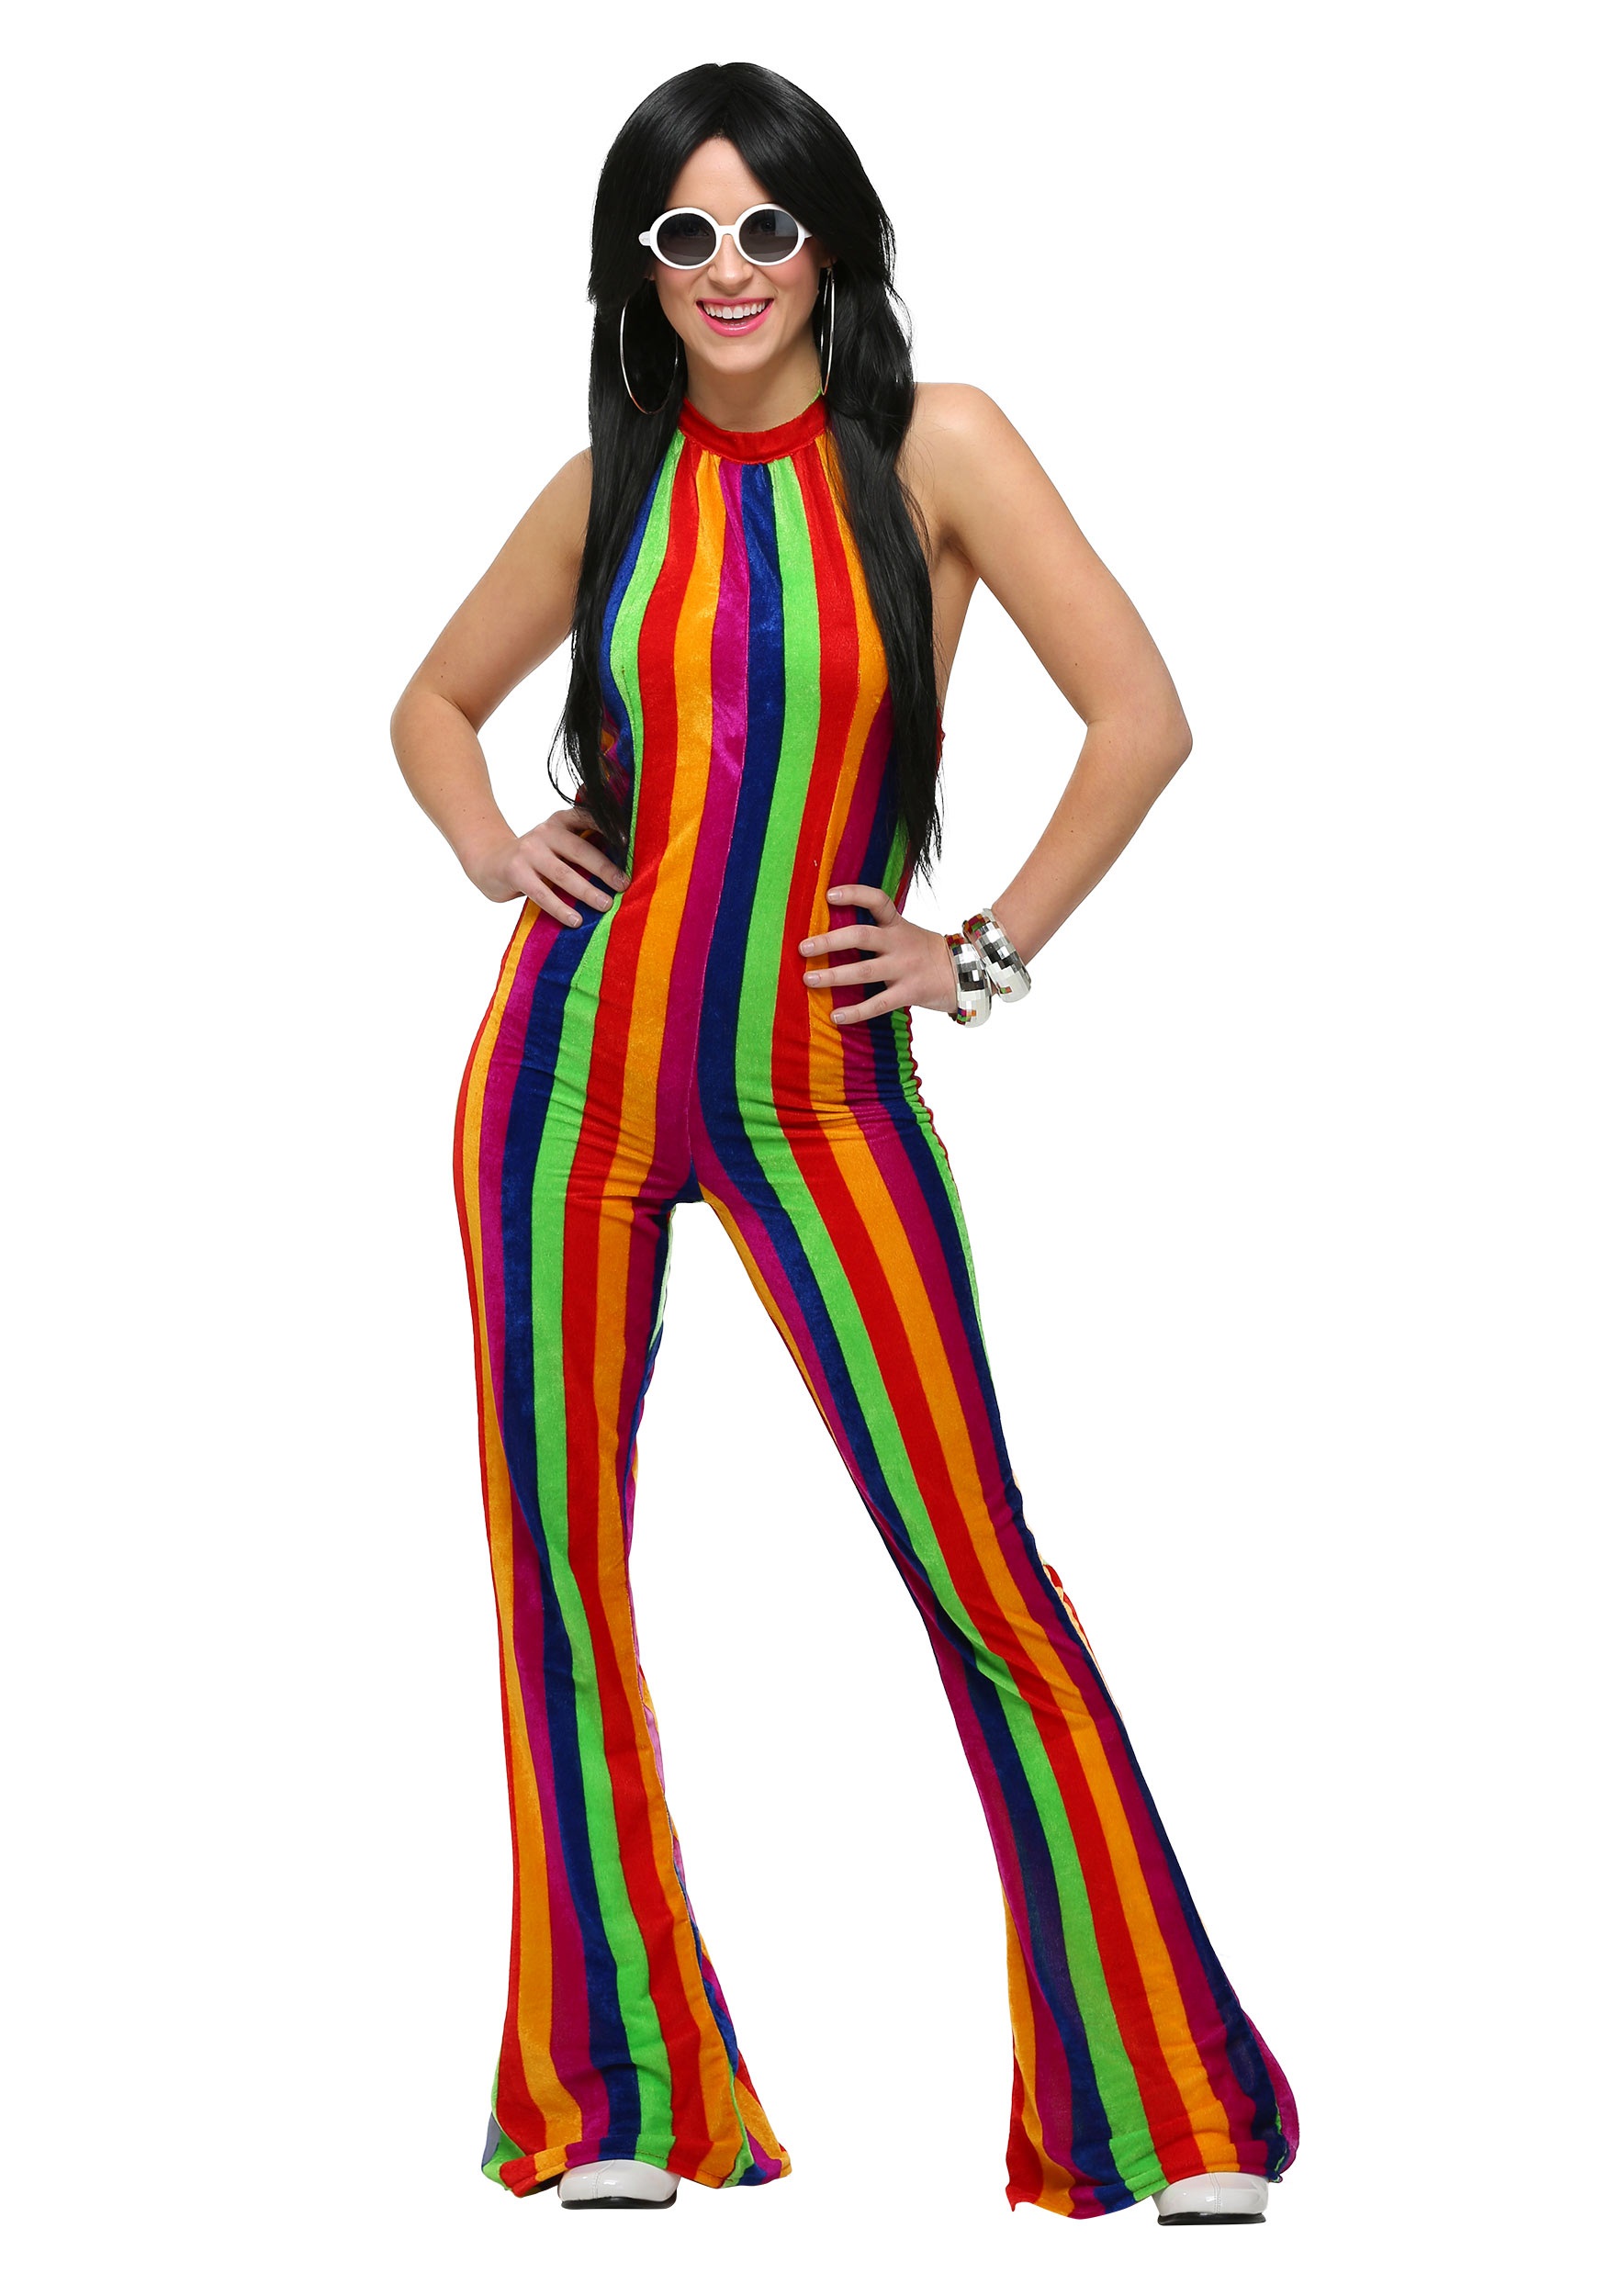  Women's Halloween 70s Disco Costumes Outfit for Adult